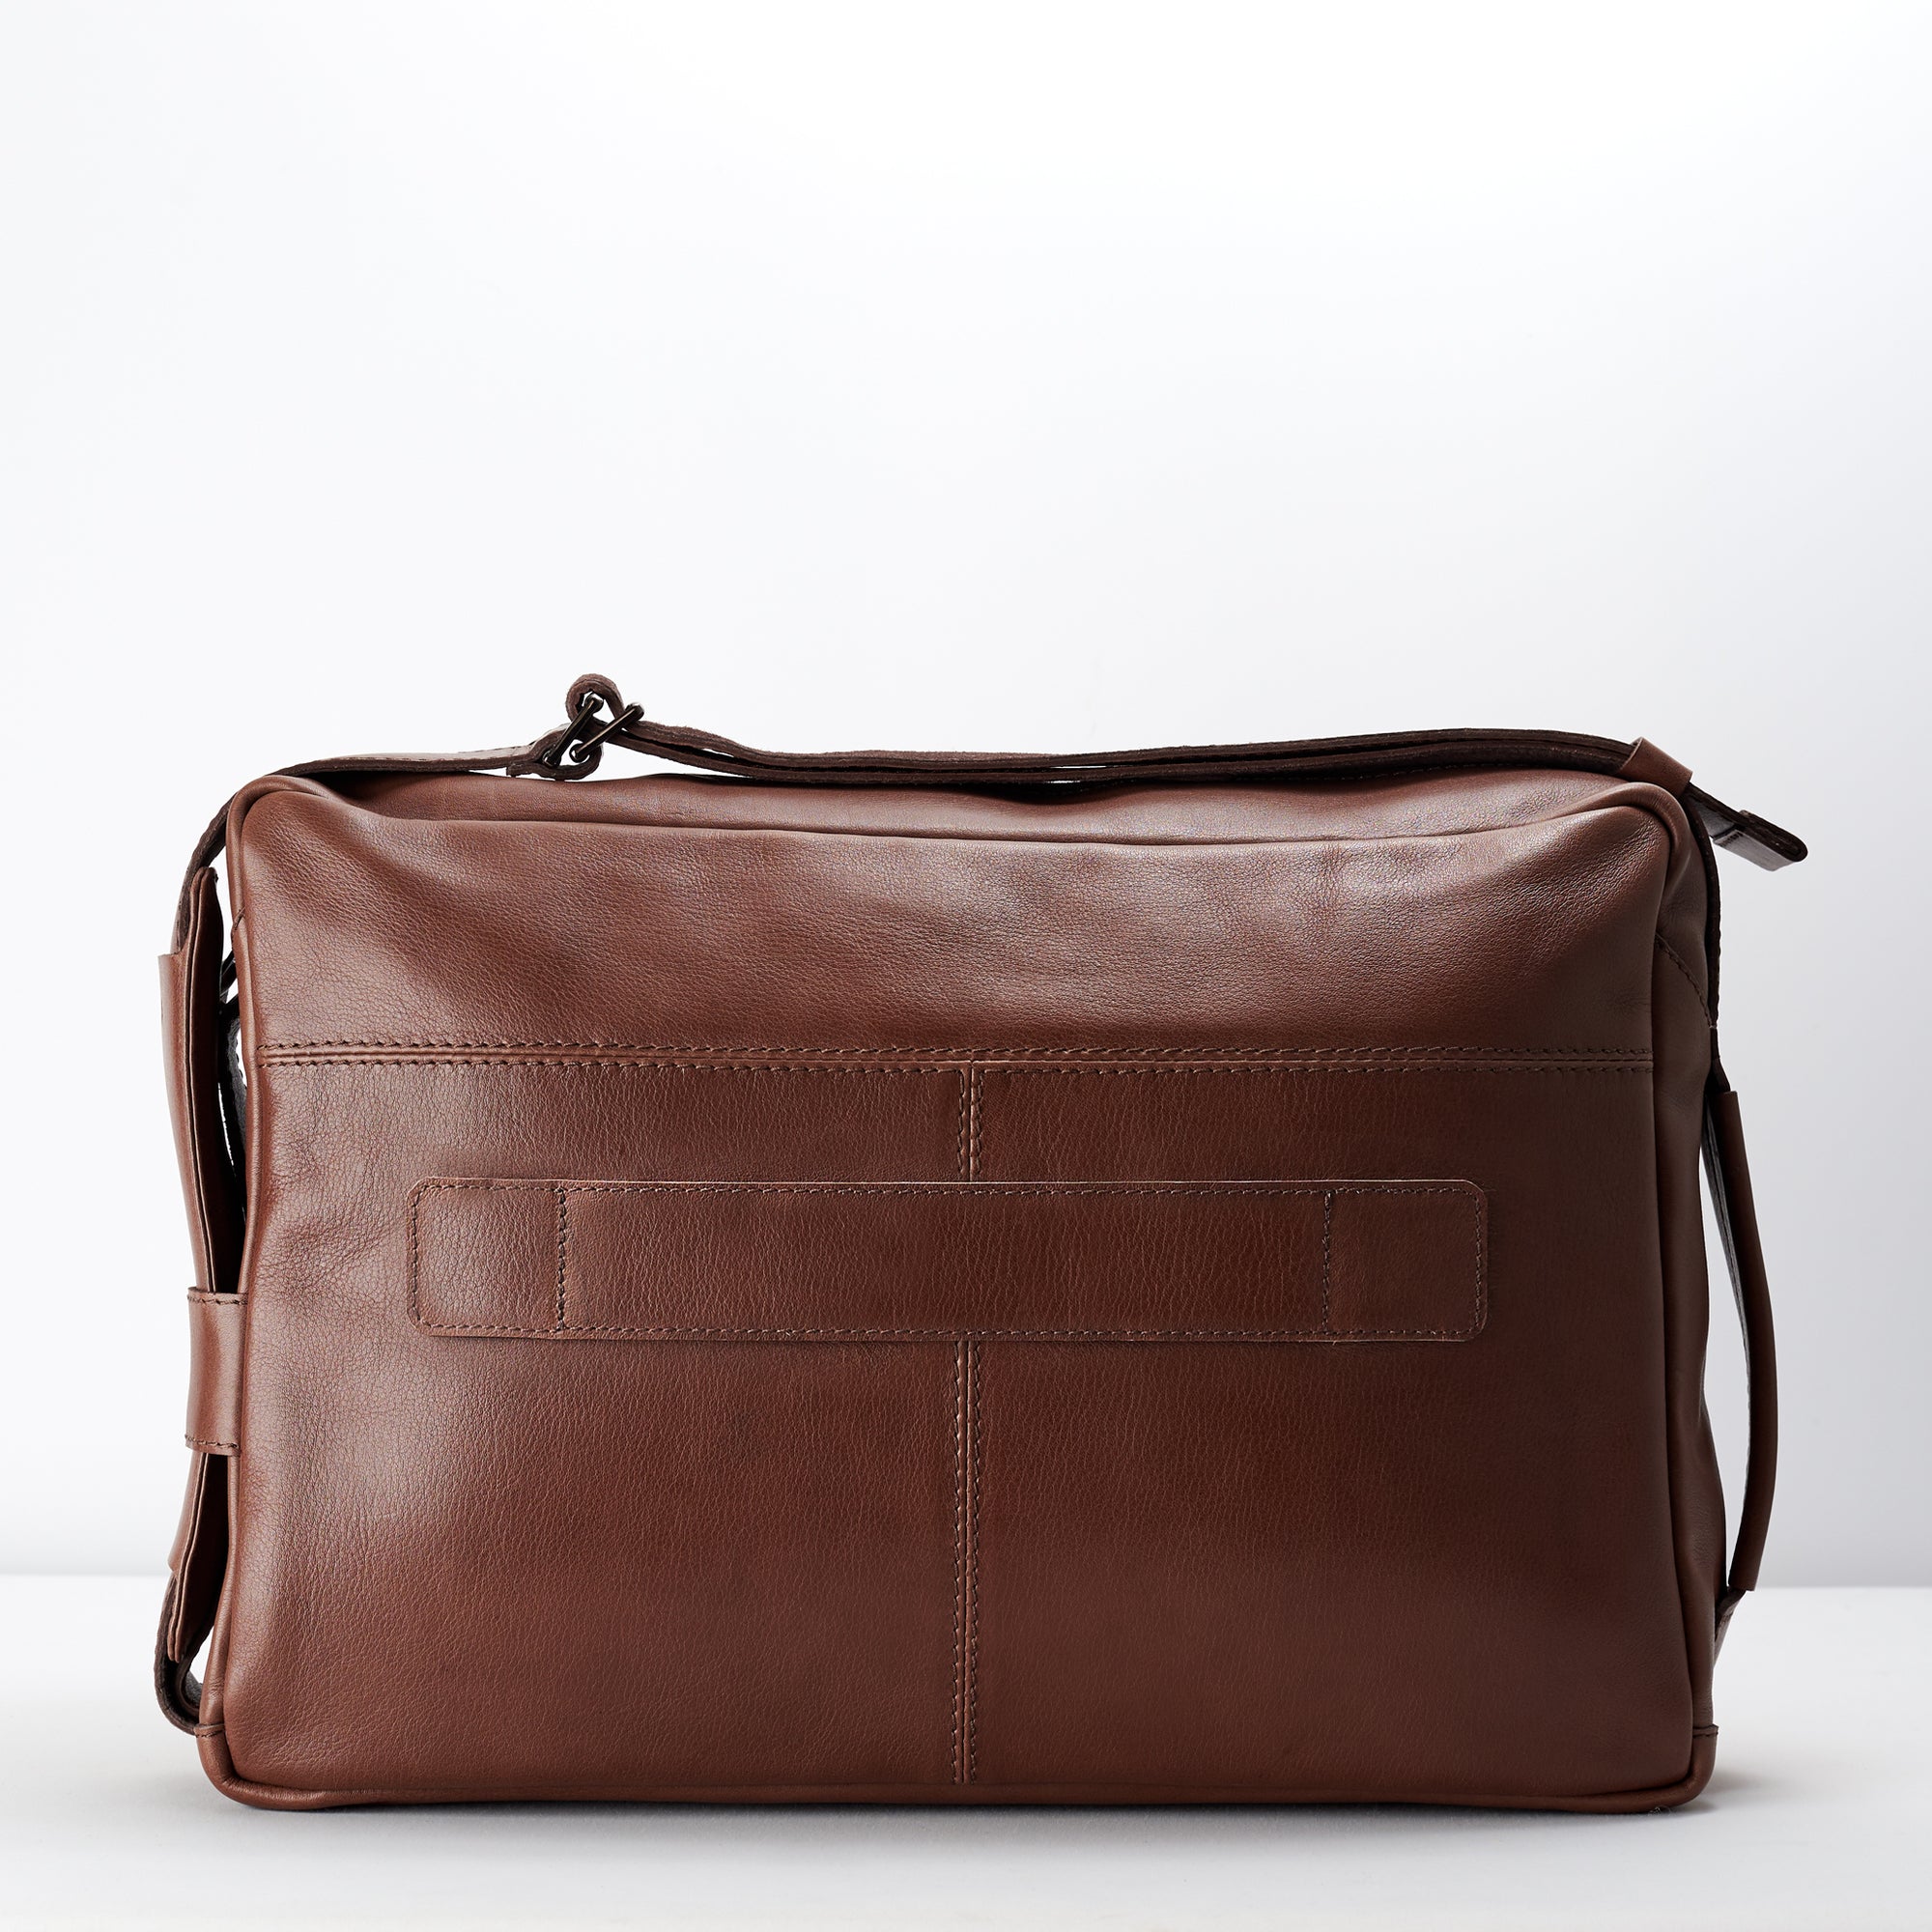 Luggage strap. Dark brown handmade leather messenger bag for Men by Capra Leather. Macbook Pro 13 inch 15 inch leather bag. Unique mens bag 